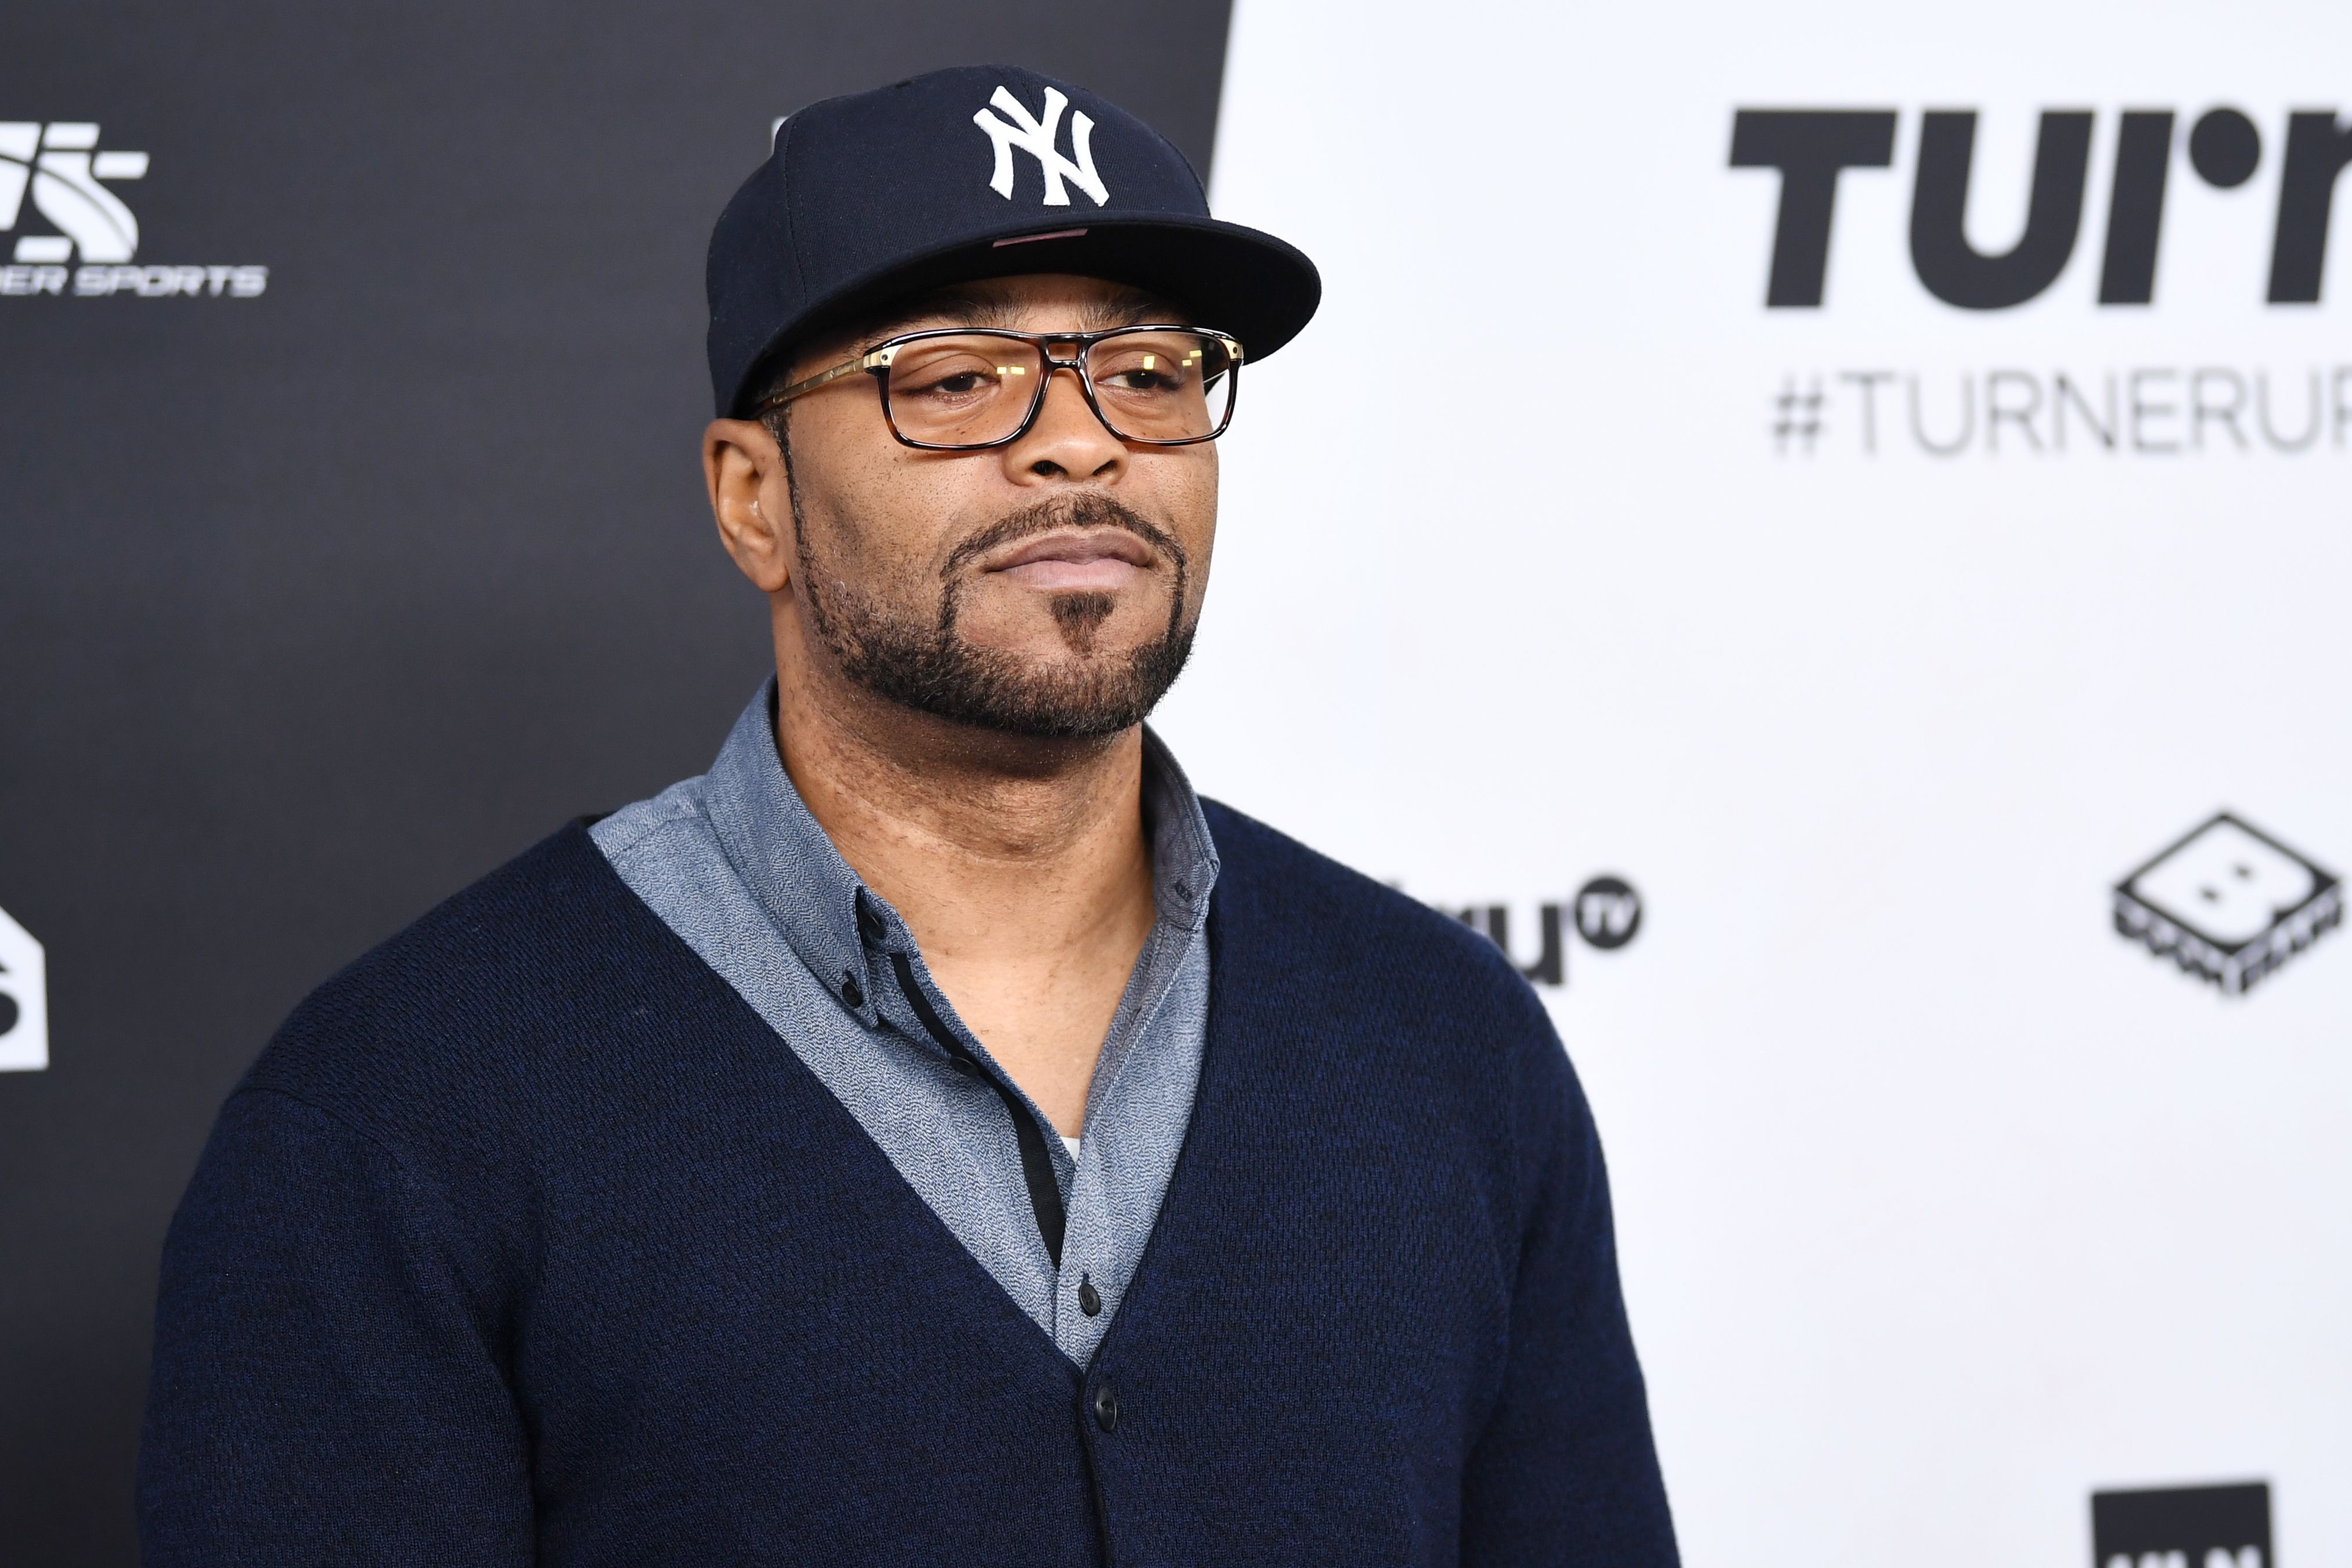 Method Man at the Turner Upfront 2018 red carpet in 2018 in New York City | Source: Getty Images